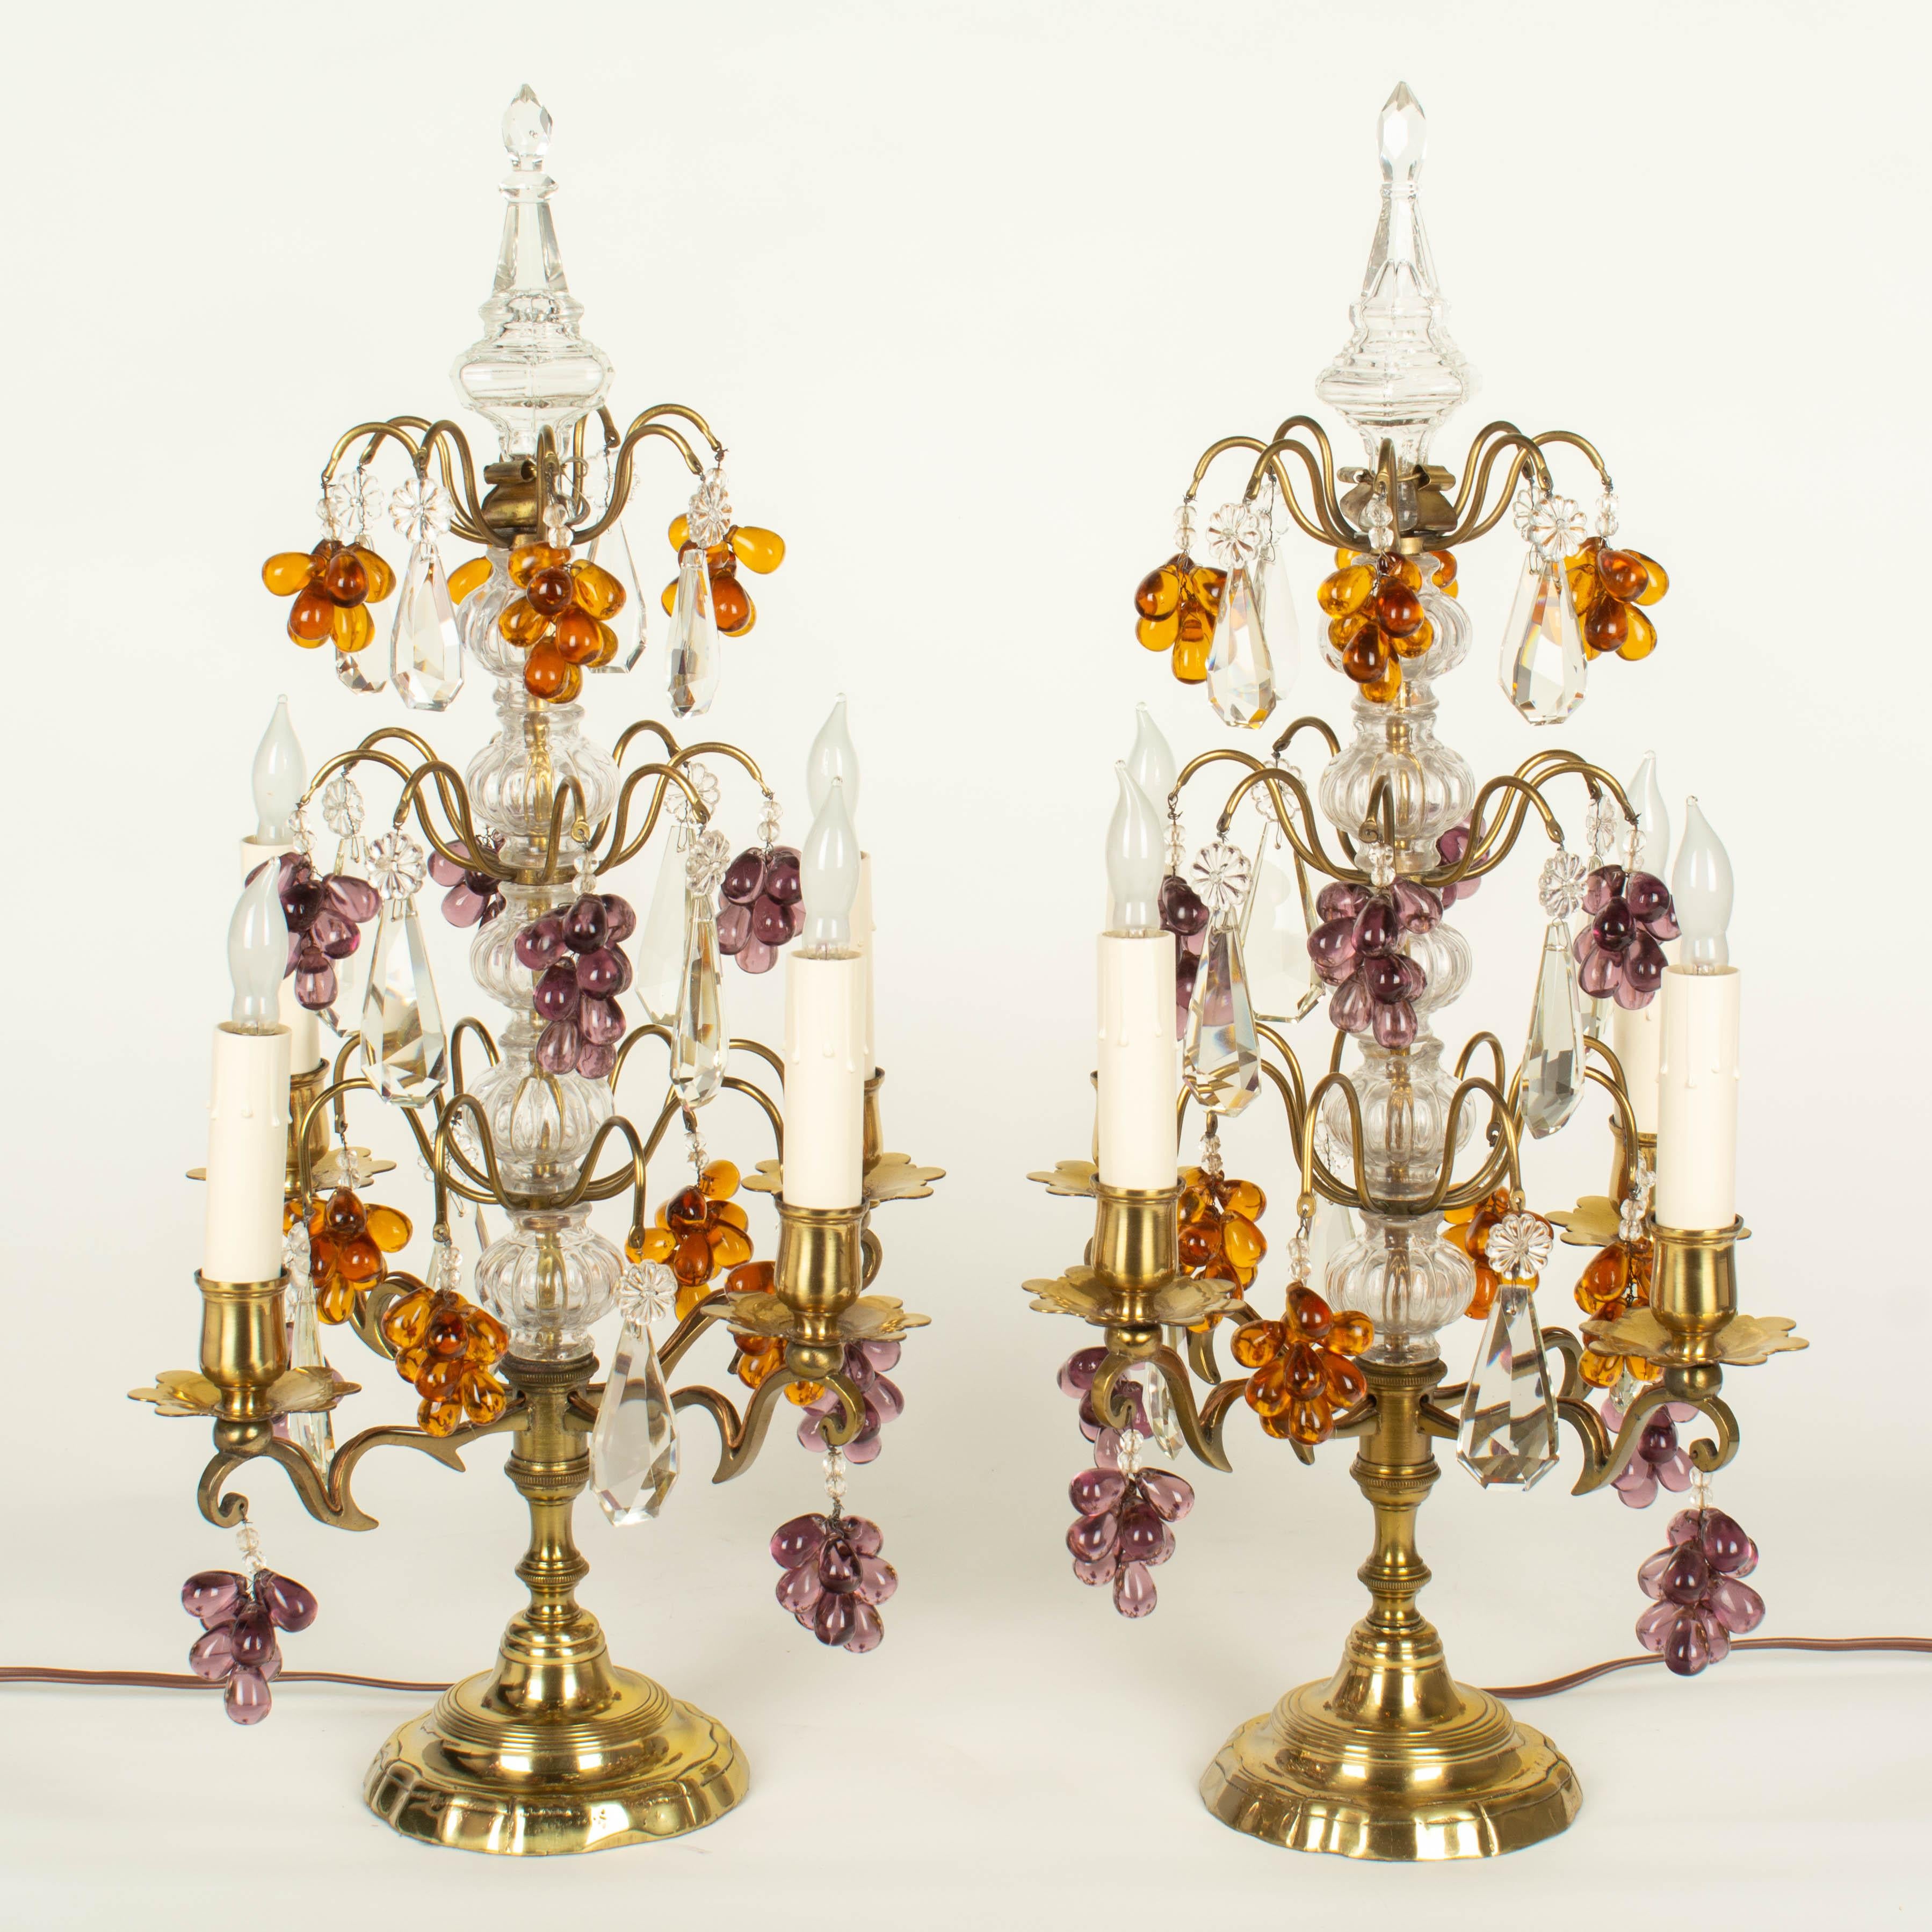 A pair of Louis XV style four-light French girandoles, or chandelier table lamps. Made of polished brass with three tiers of bevel cut crystal prisms and amber and amethyst grape clusters, ribbed columns and spear finials. Tall, elegant proportions.